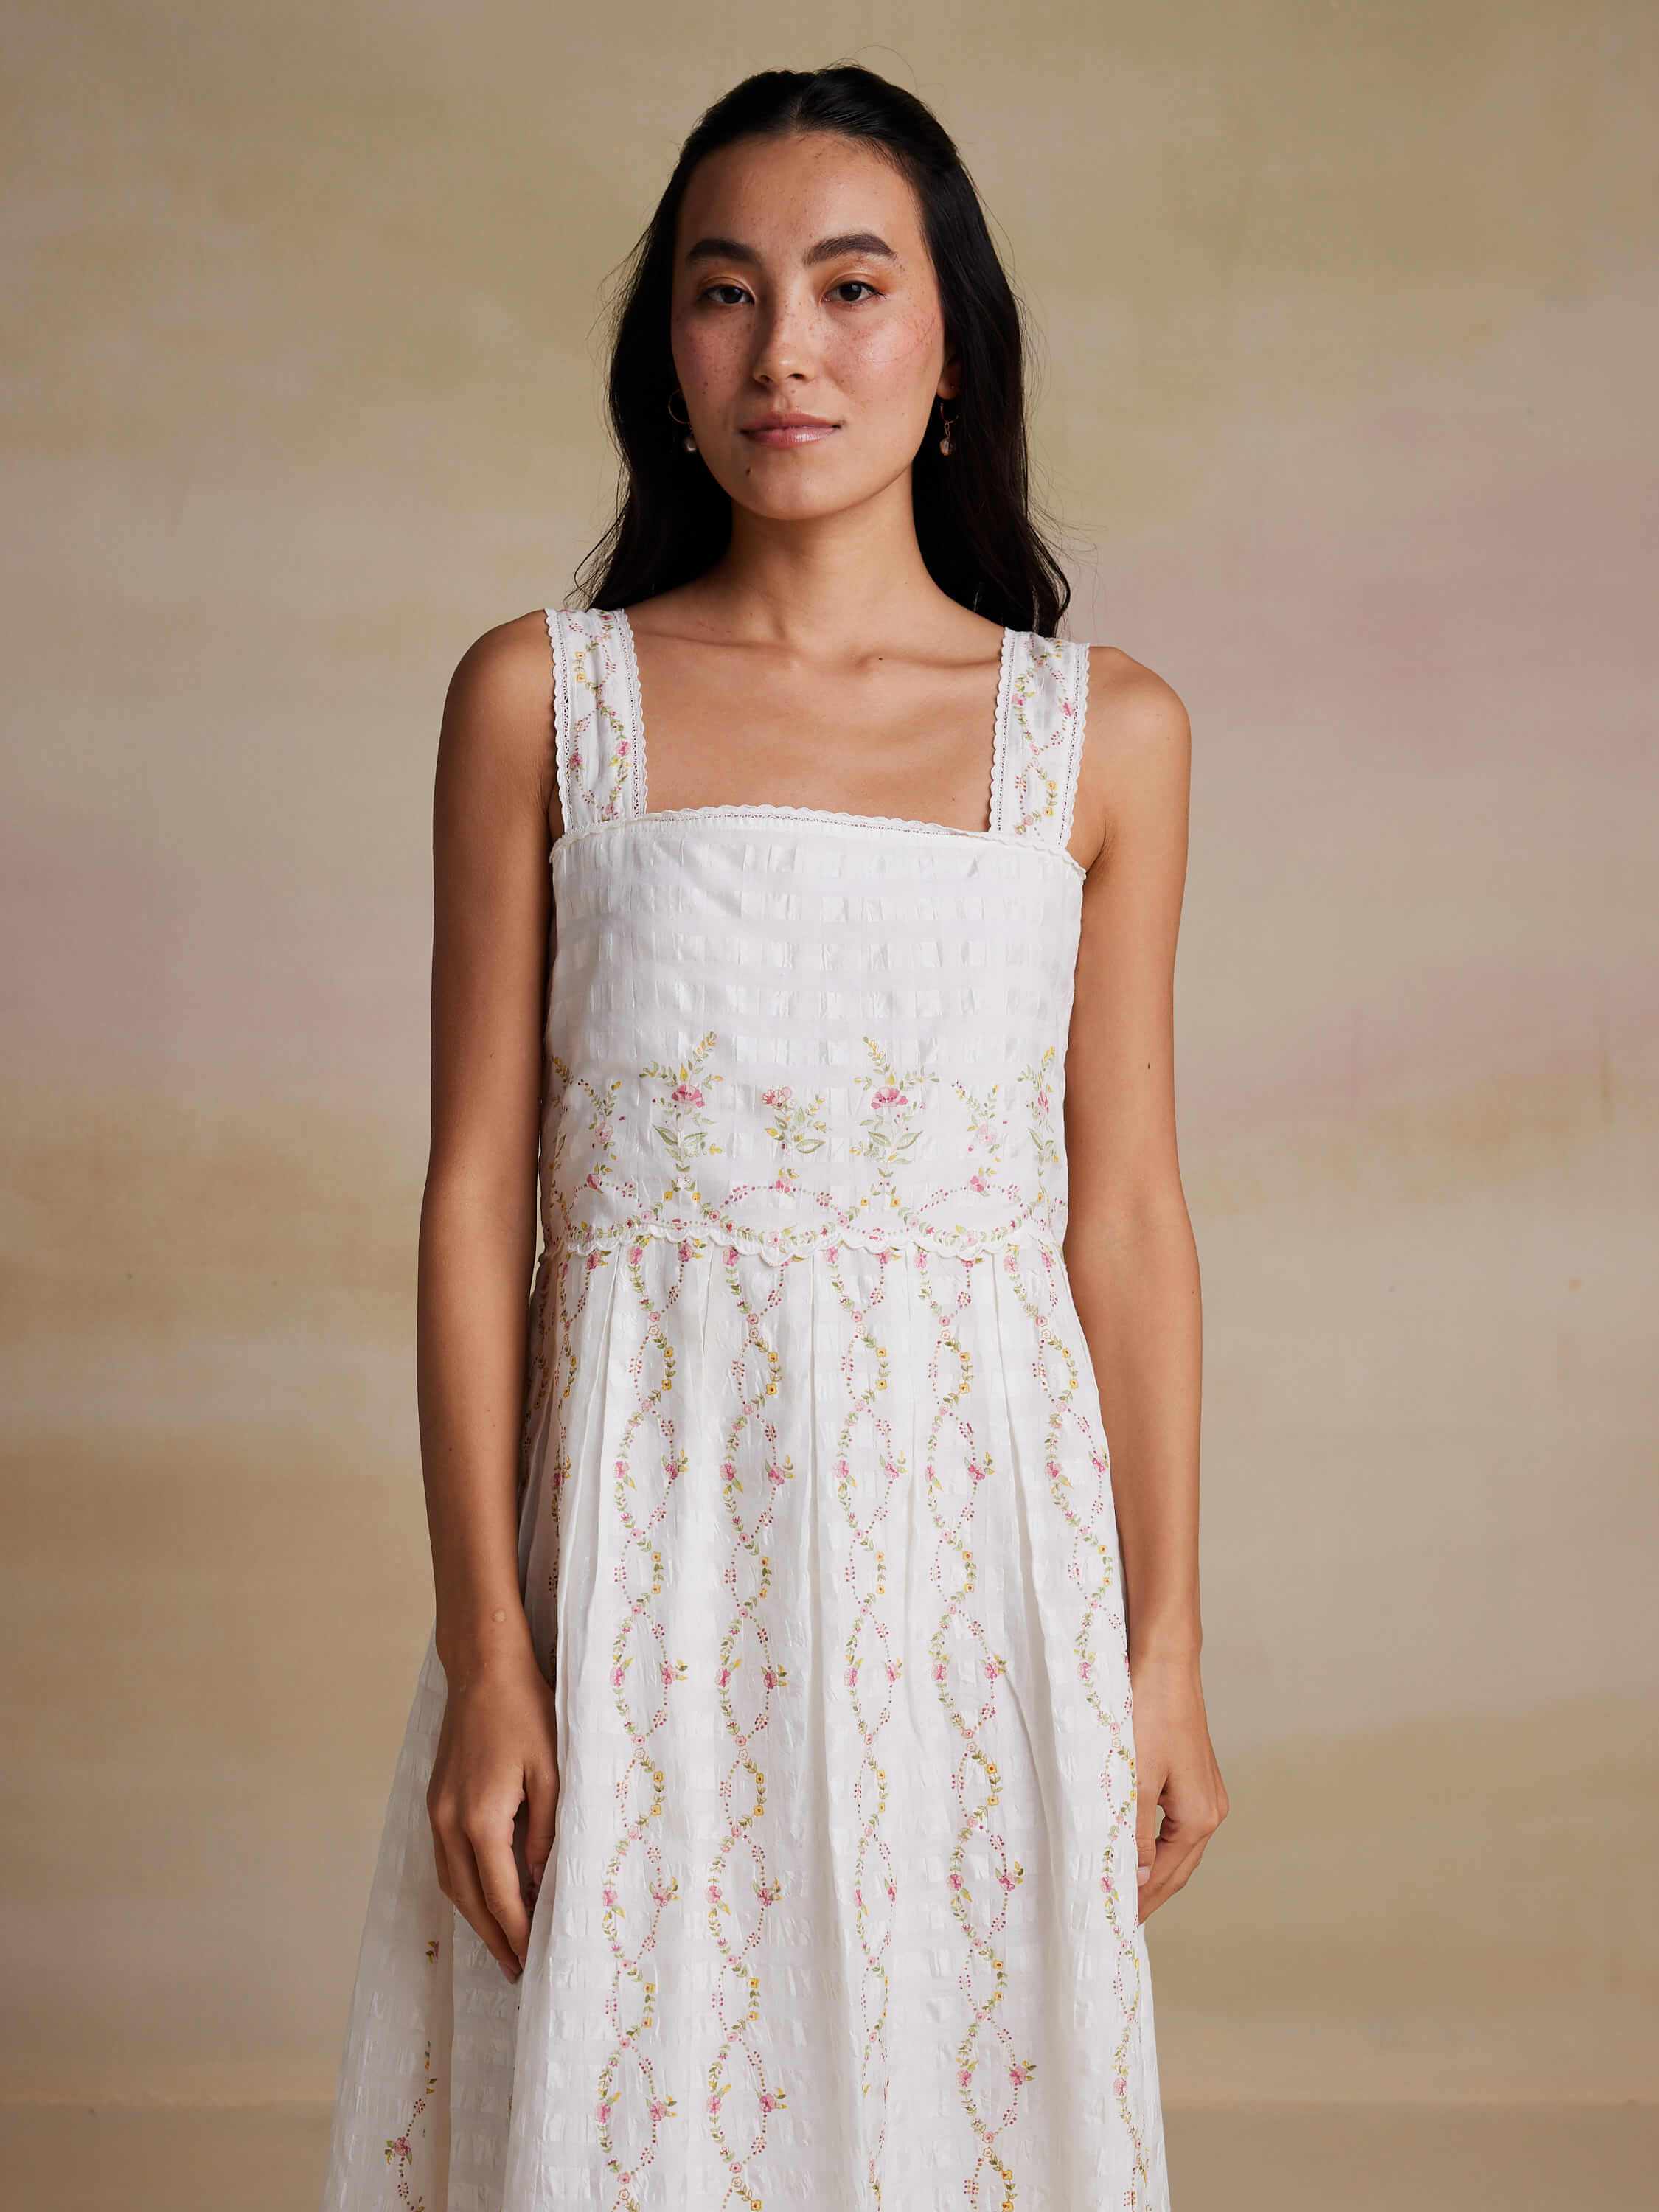 Woman wearing white sleeveless dress with floral embroidery pattern.